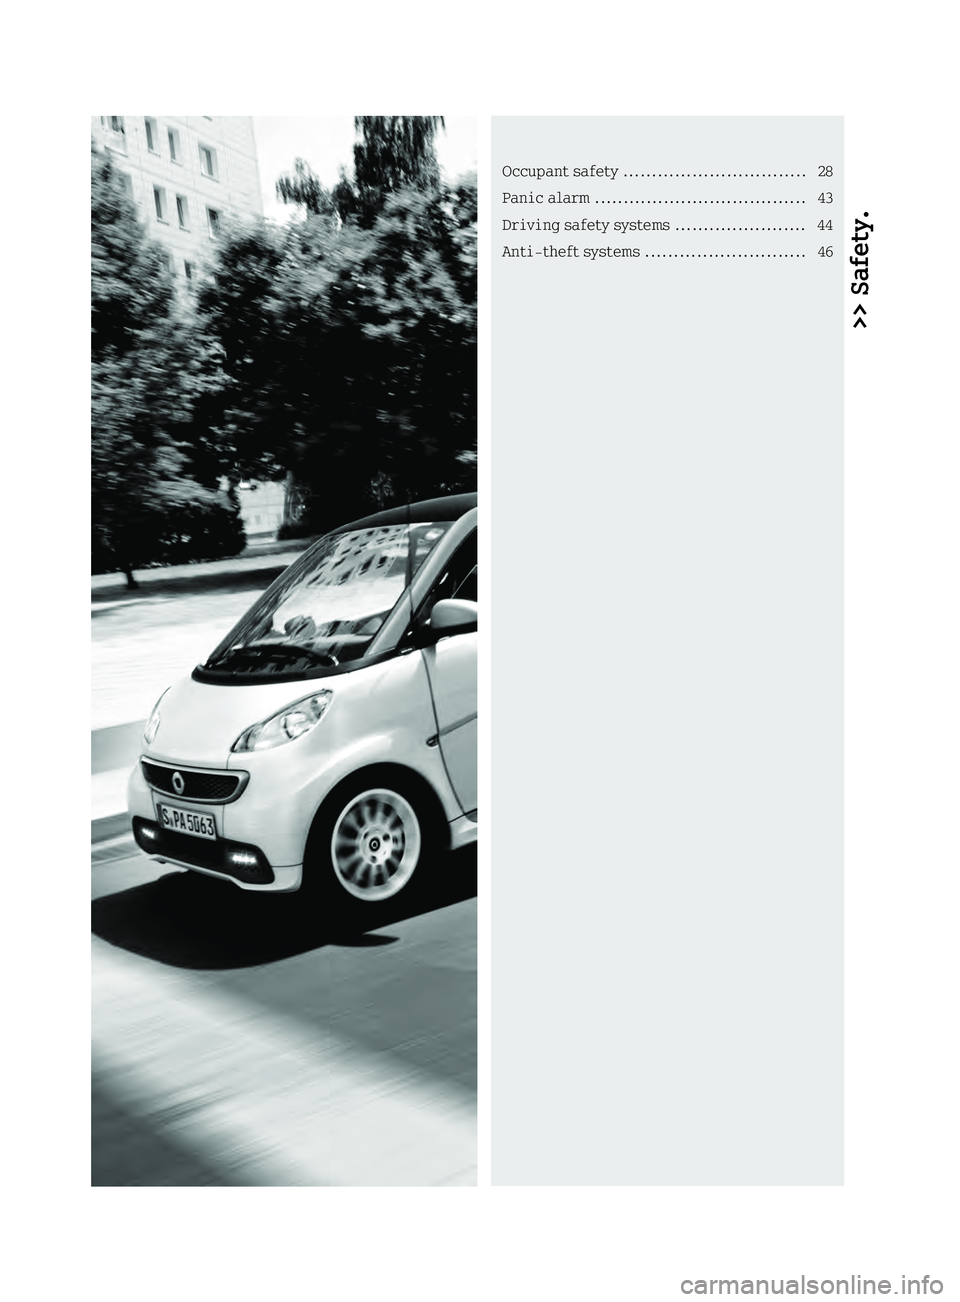 SMART FORTWO COUPE ELECTRIC DRIVE 2013 Owners Manual >> Safety.Occupan
tsafety ................................ 28
Panic alarm ..................................... 43
Driving safety systems .......................44
Anti-theft systems .................